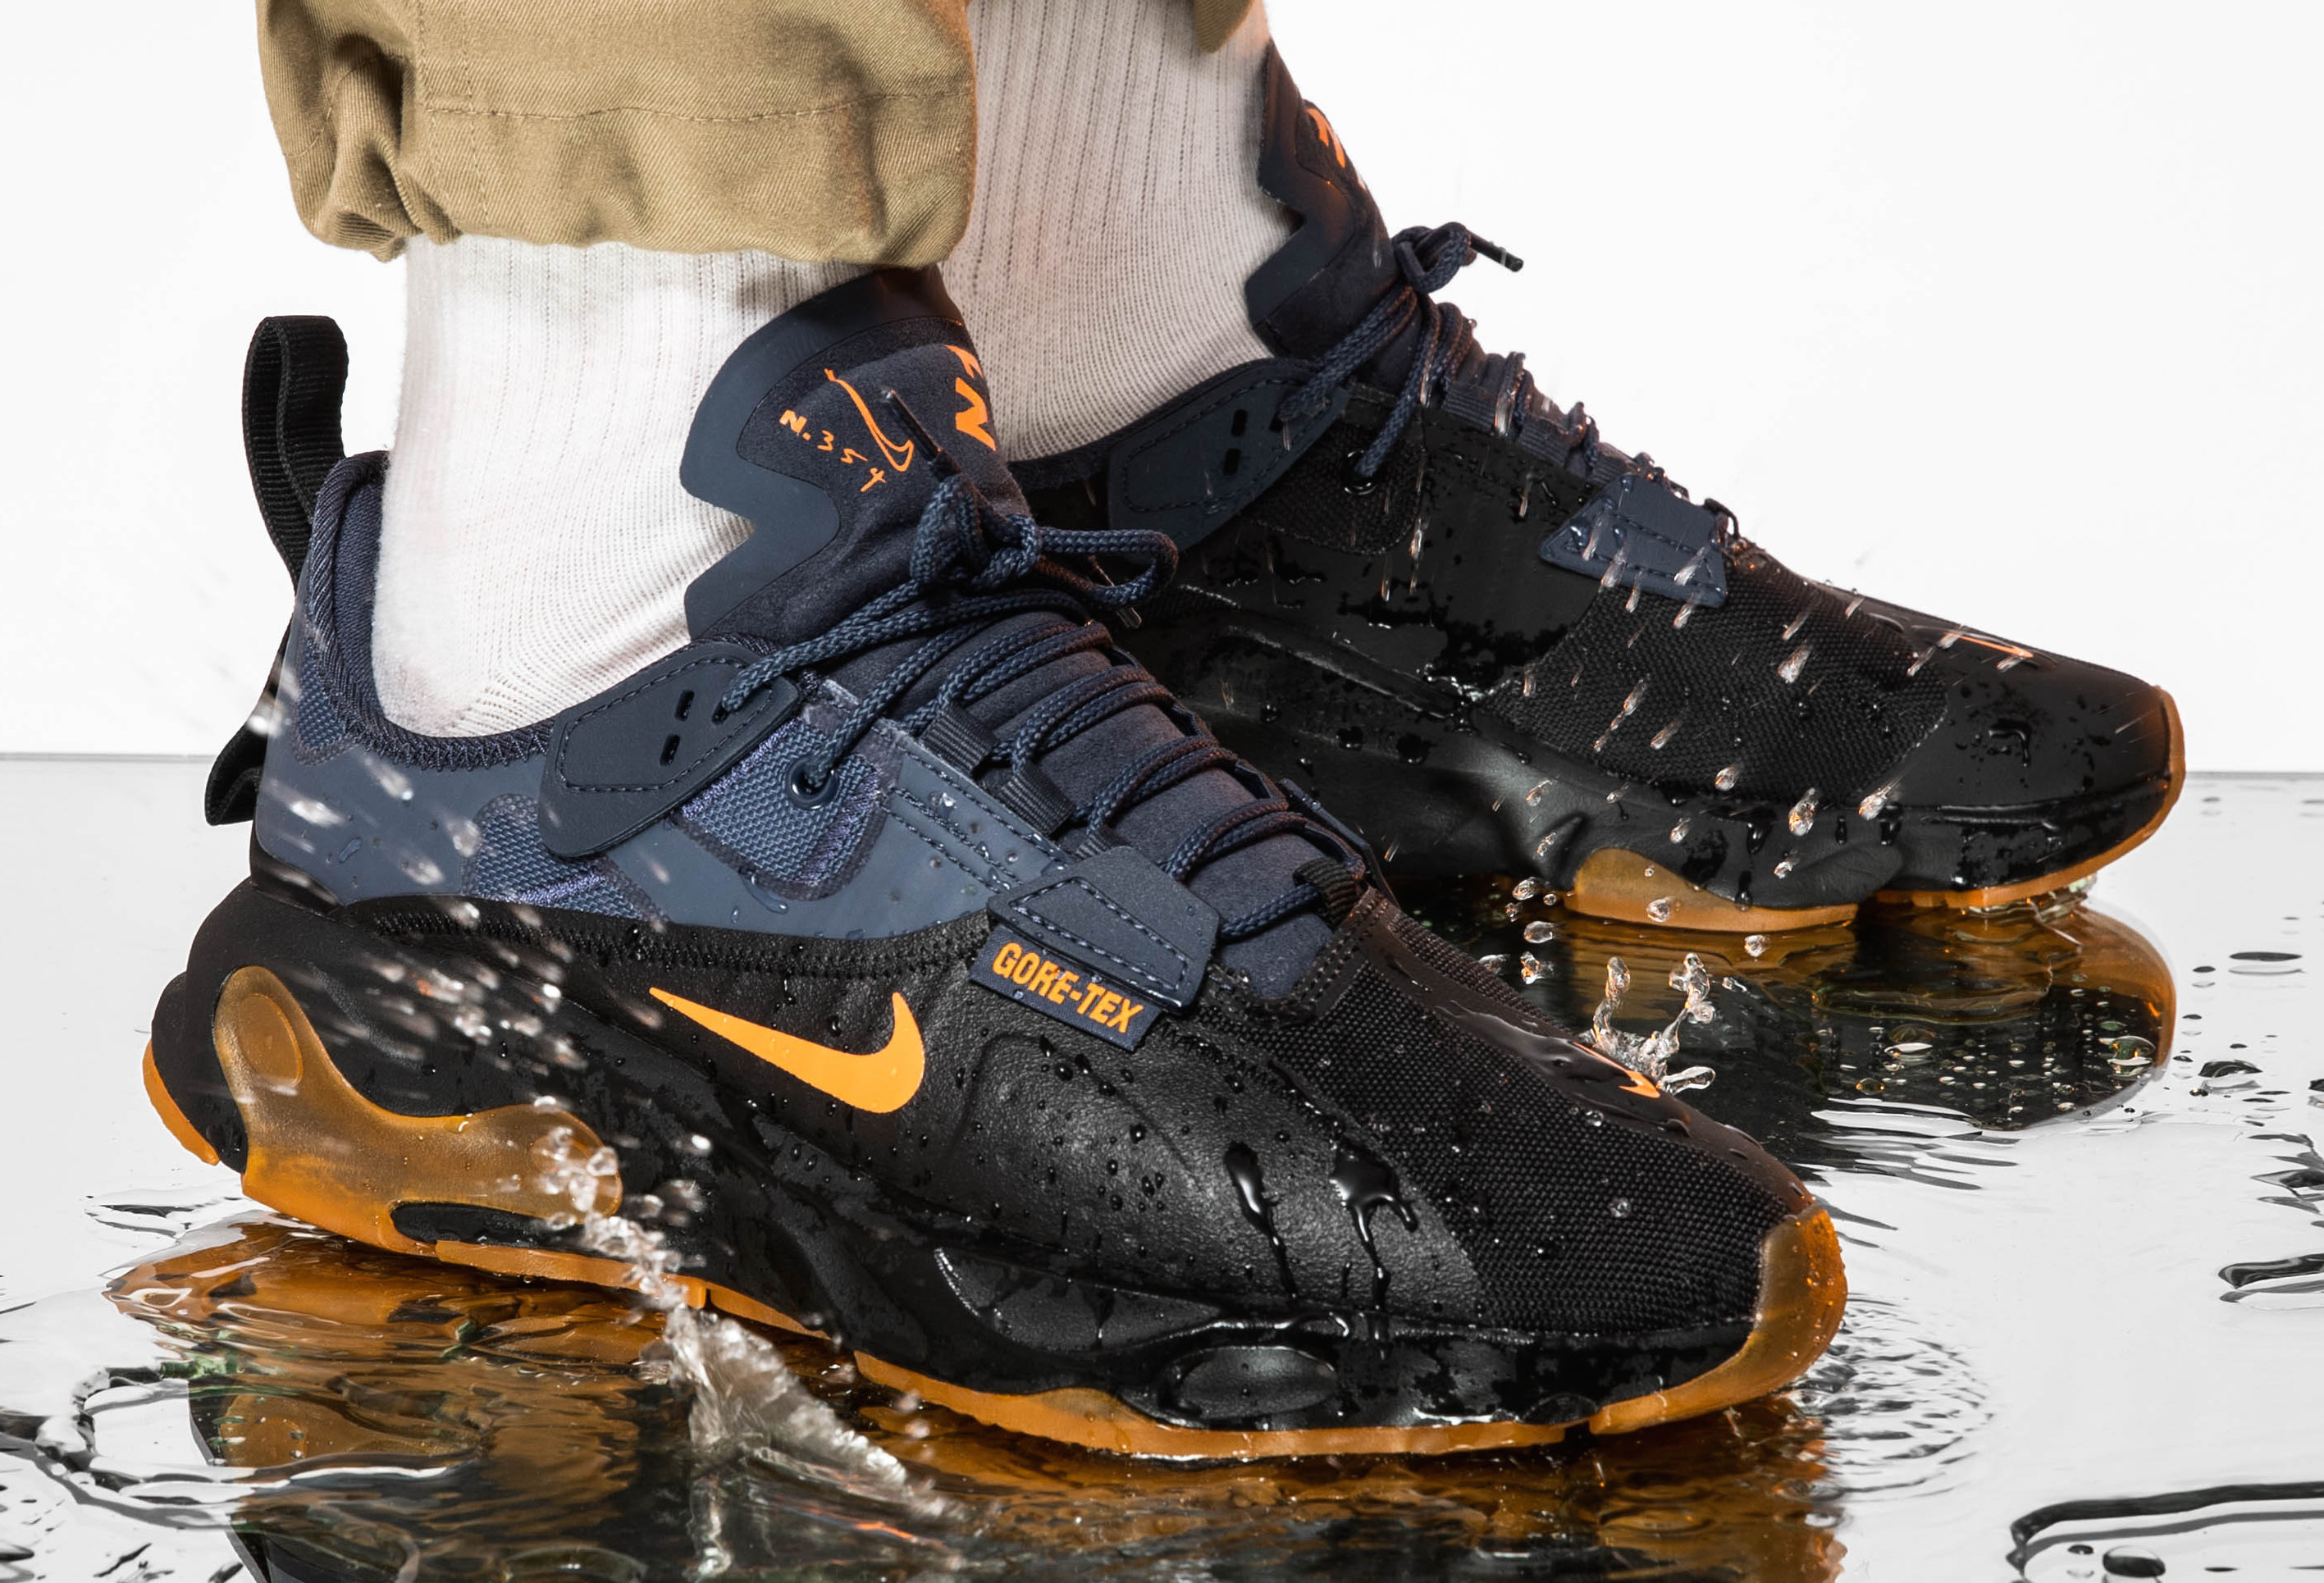 Nike Unveils a Weatherized GORE-TEX 